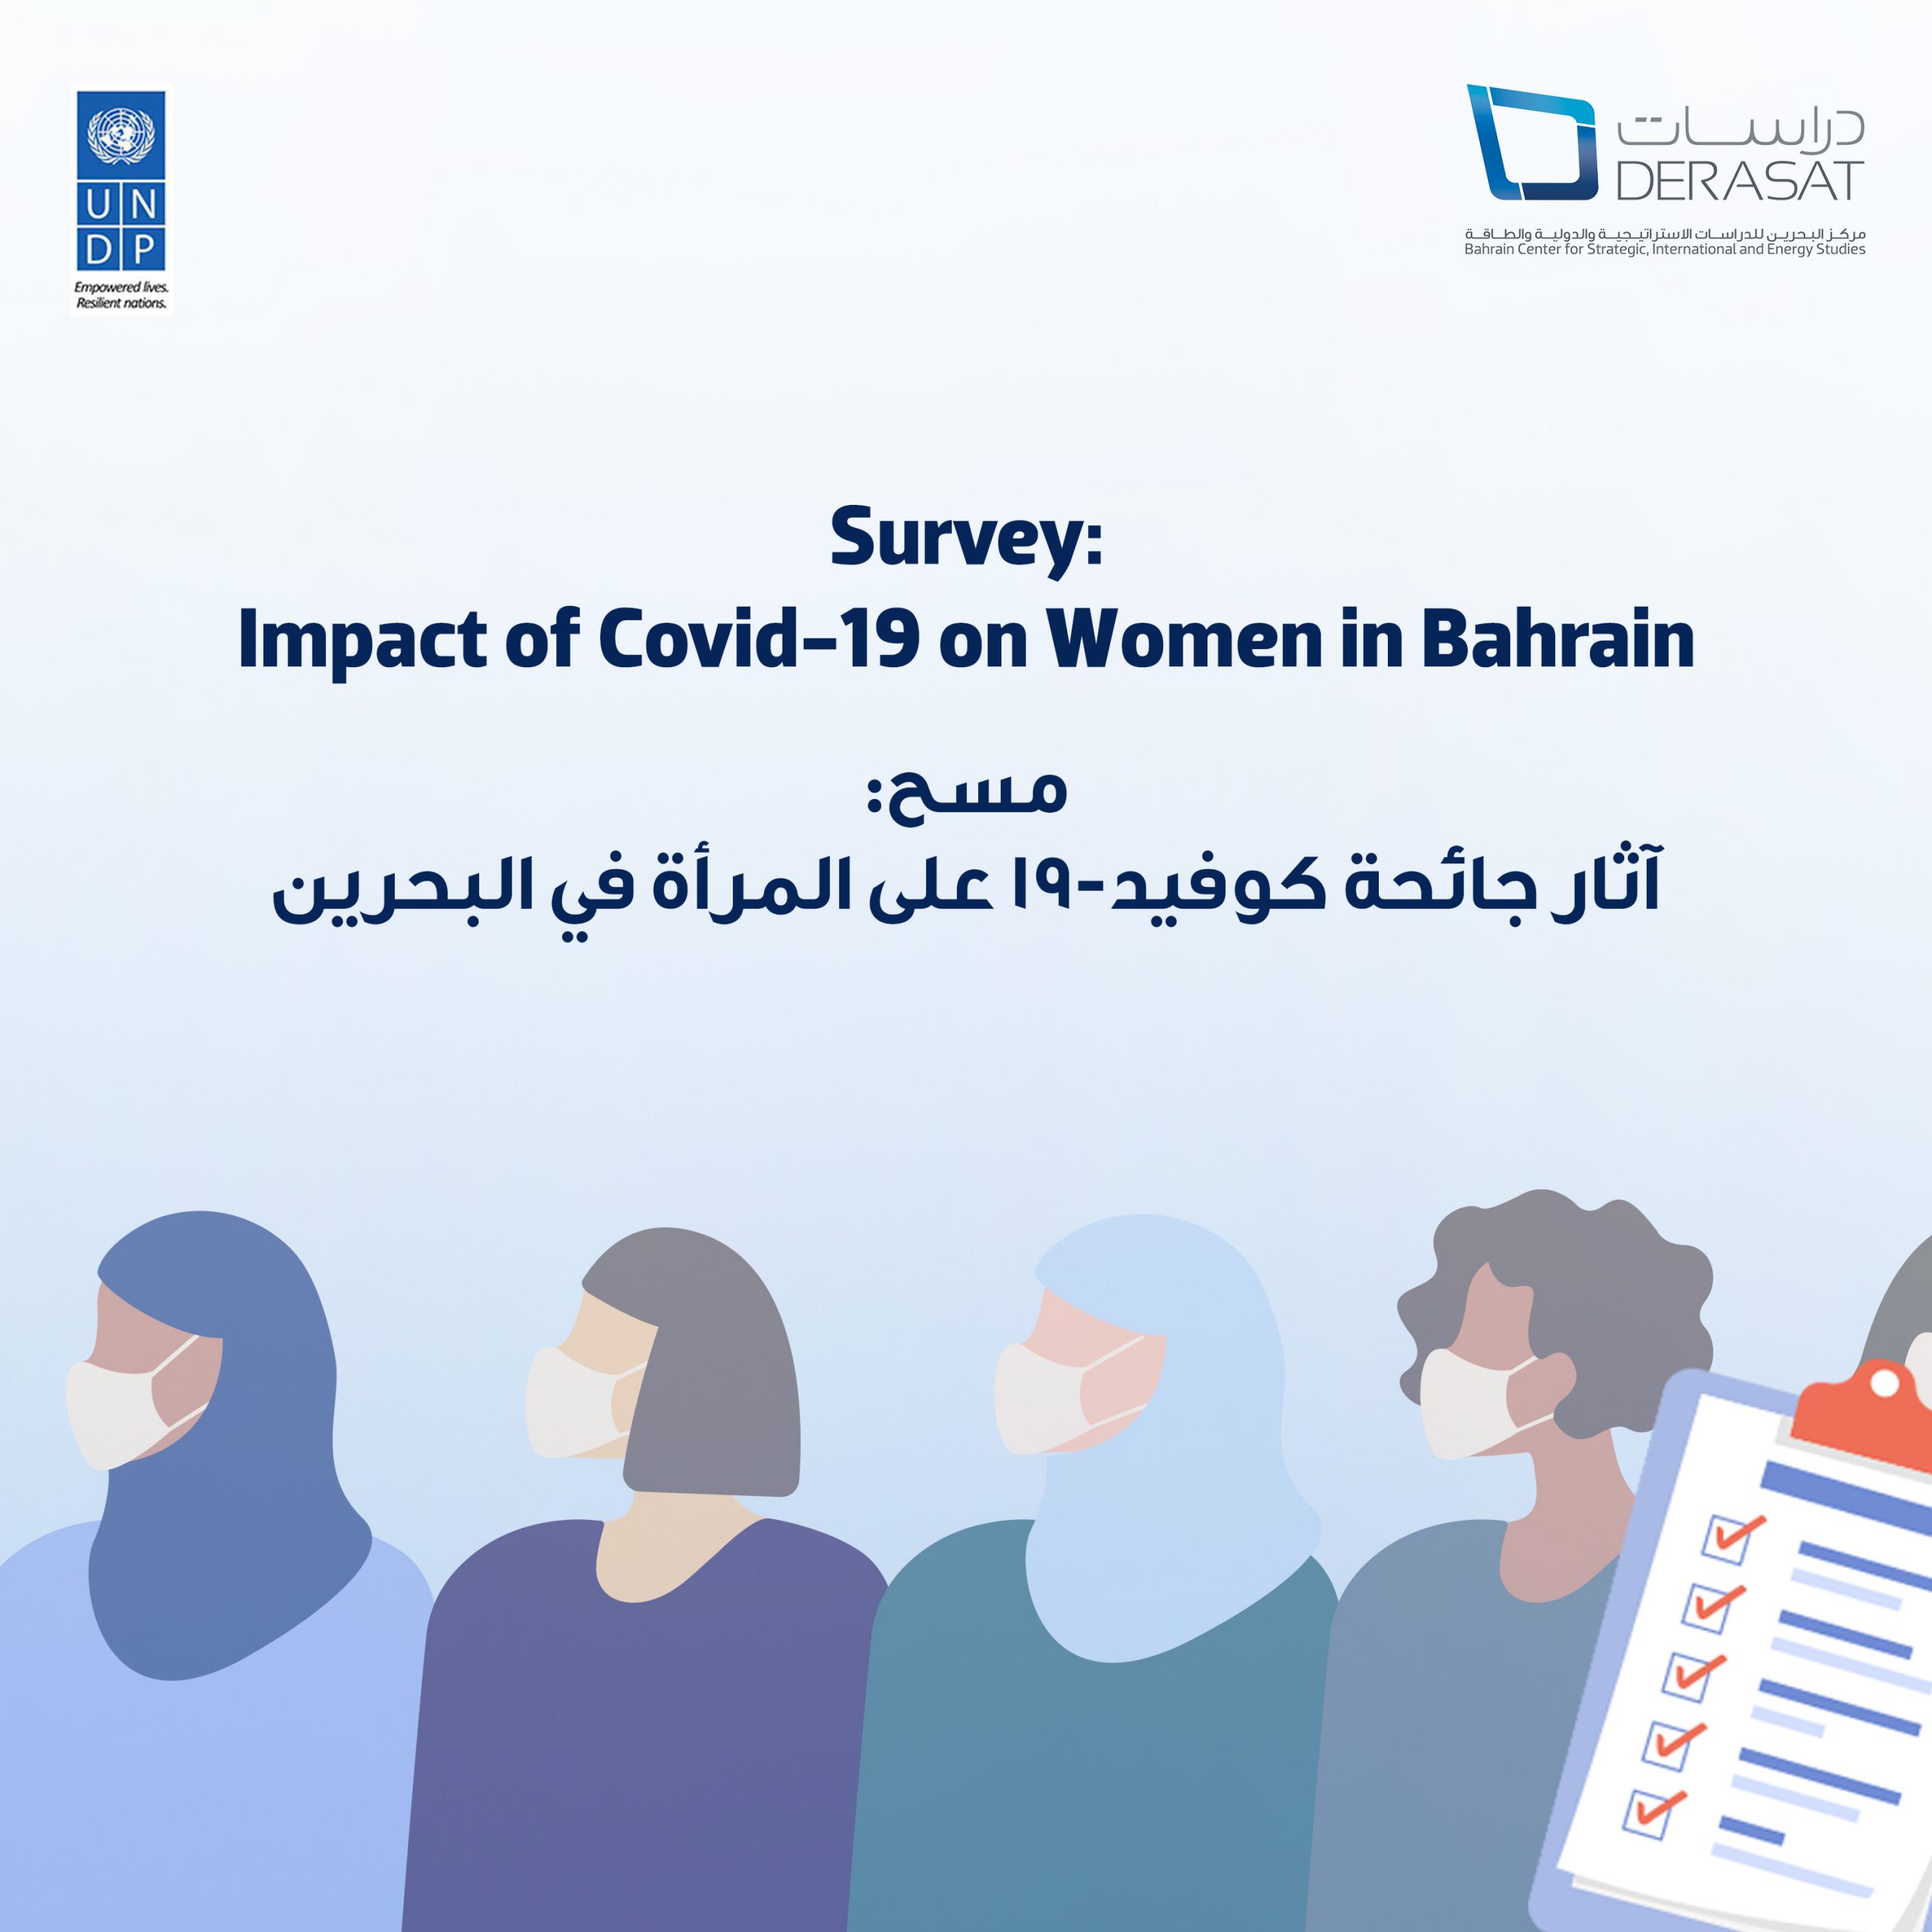 Opinion poll on “The Impact of COVID-19 on Women in Bahrain”